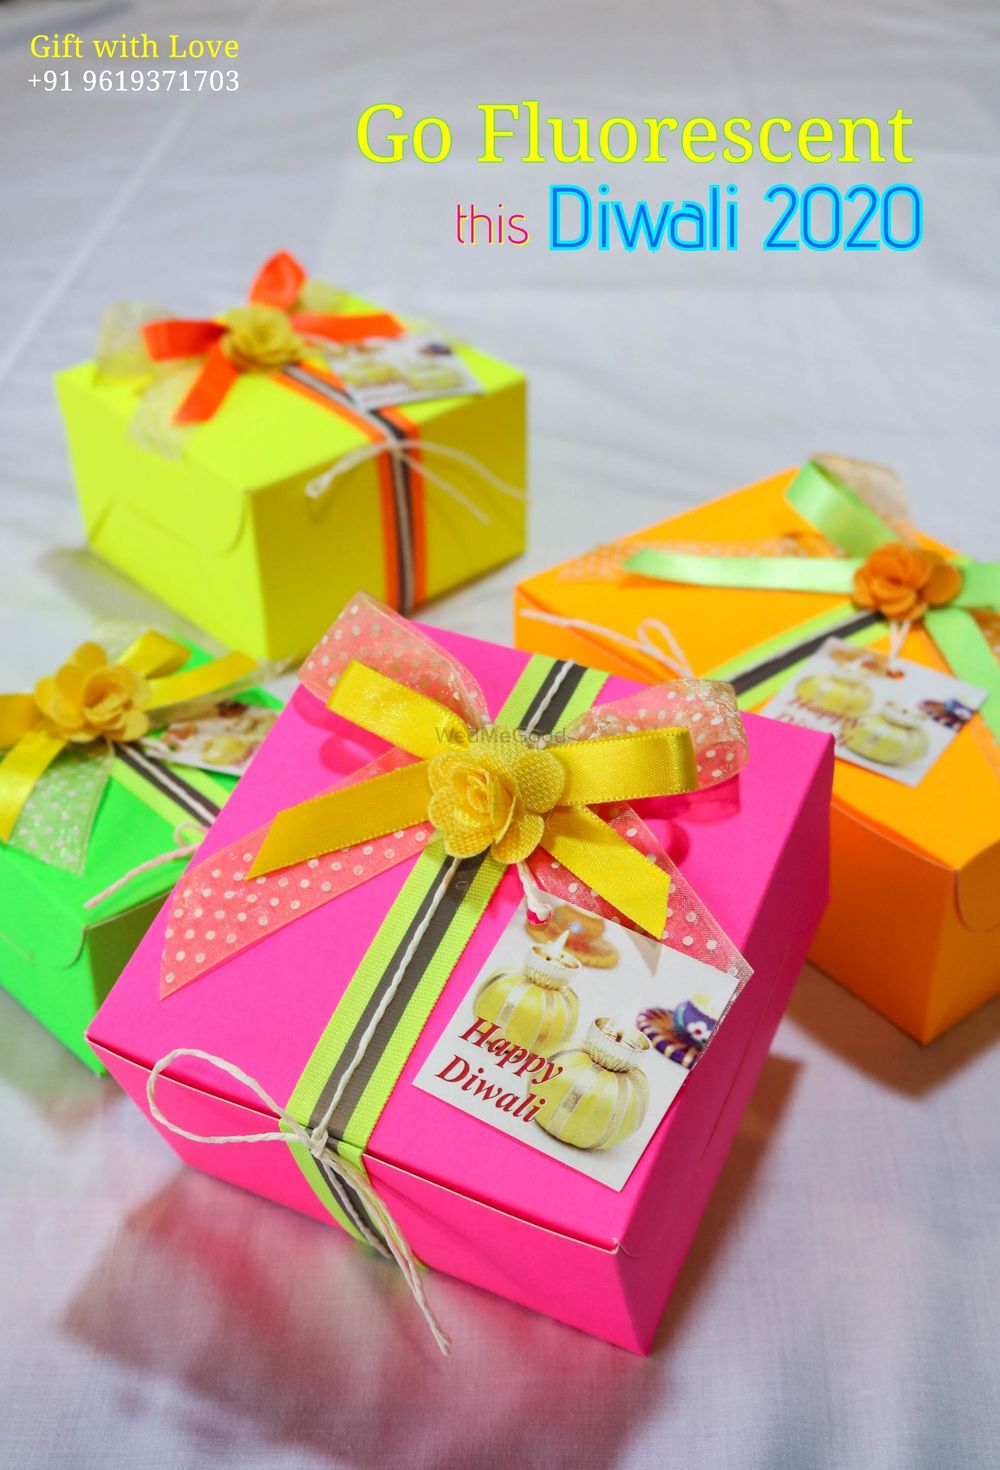 Photo From Boxes, Paper bags and Gift Wrapping - By Gift with Love